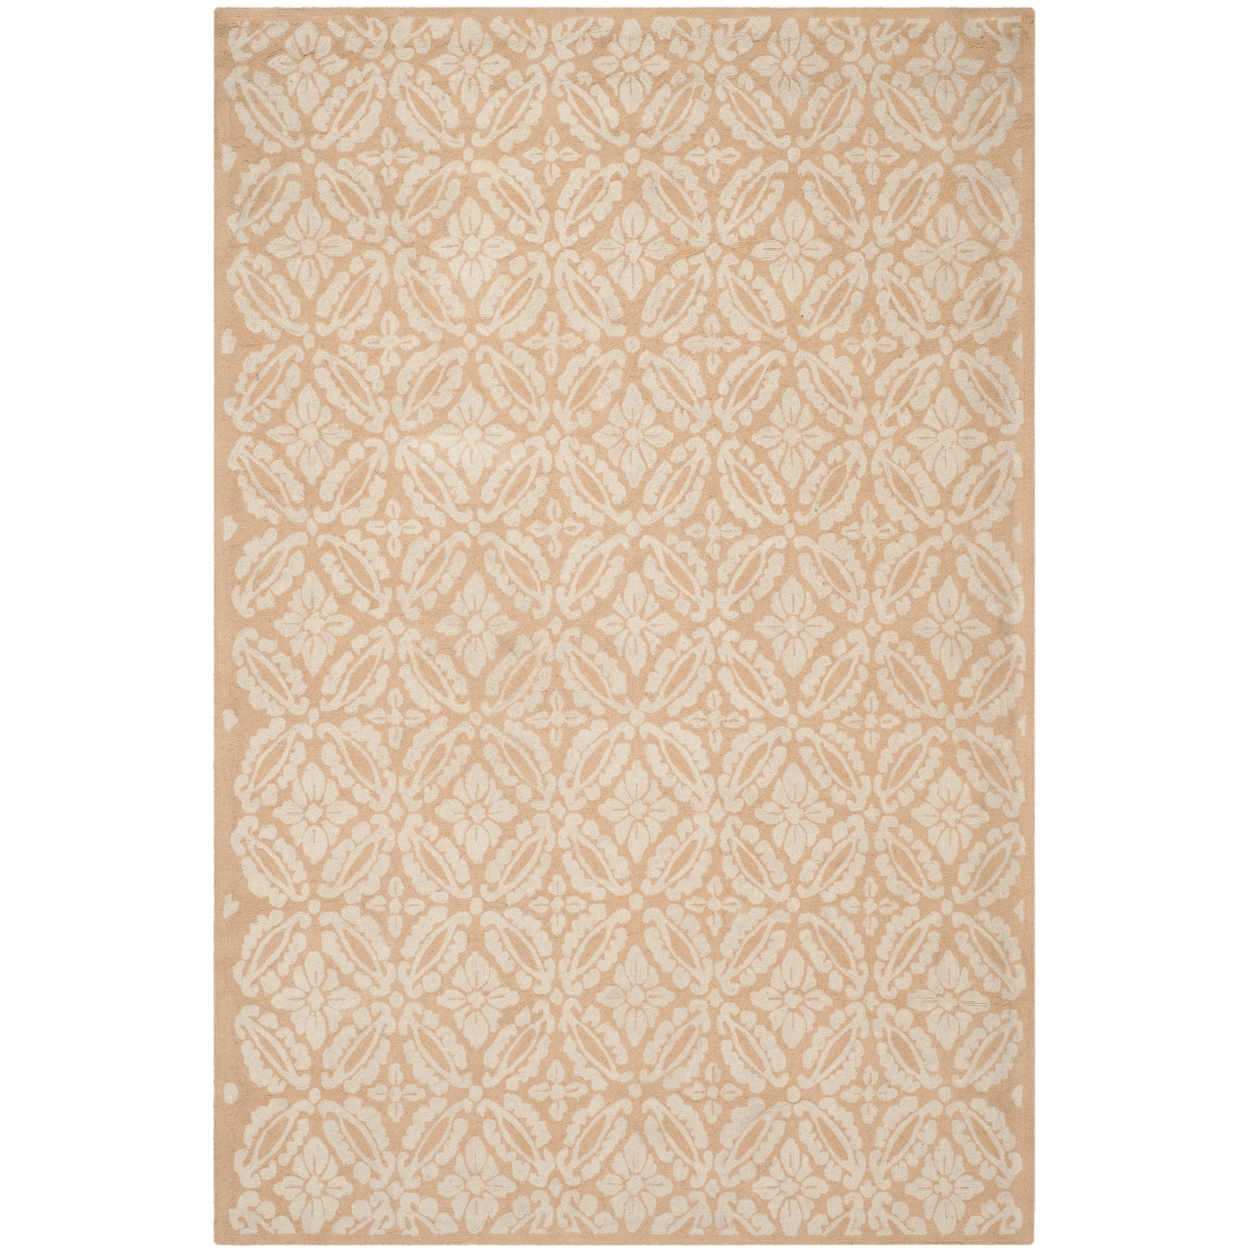 SAFAVIEH Chelsea Collection HK723C Hand-hooked Blush Rug - 6' X 9'